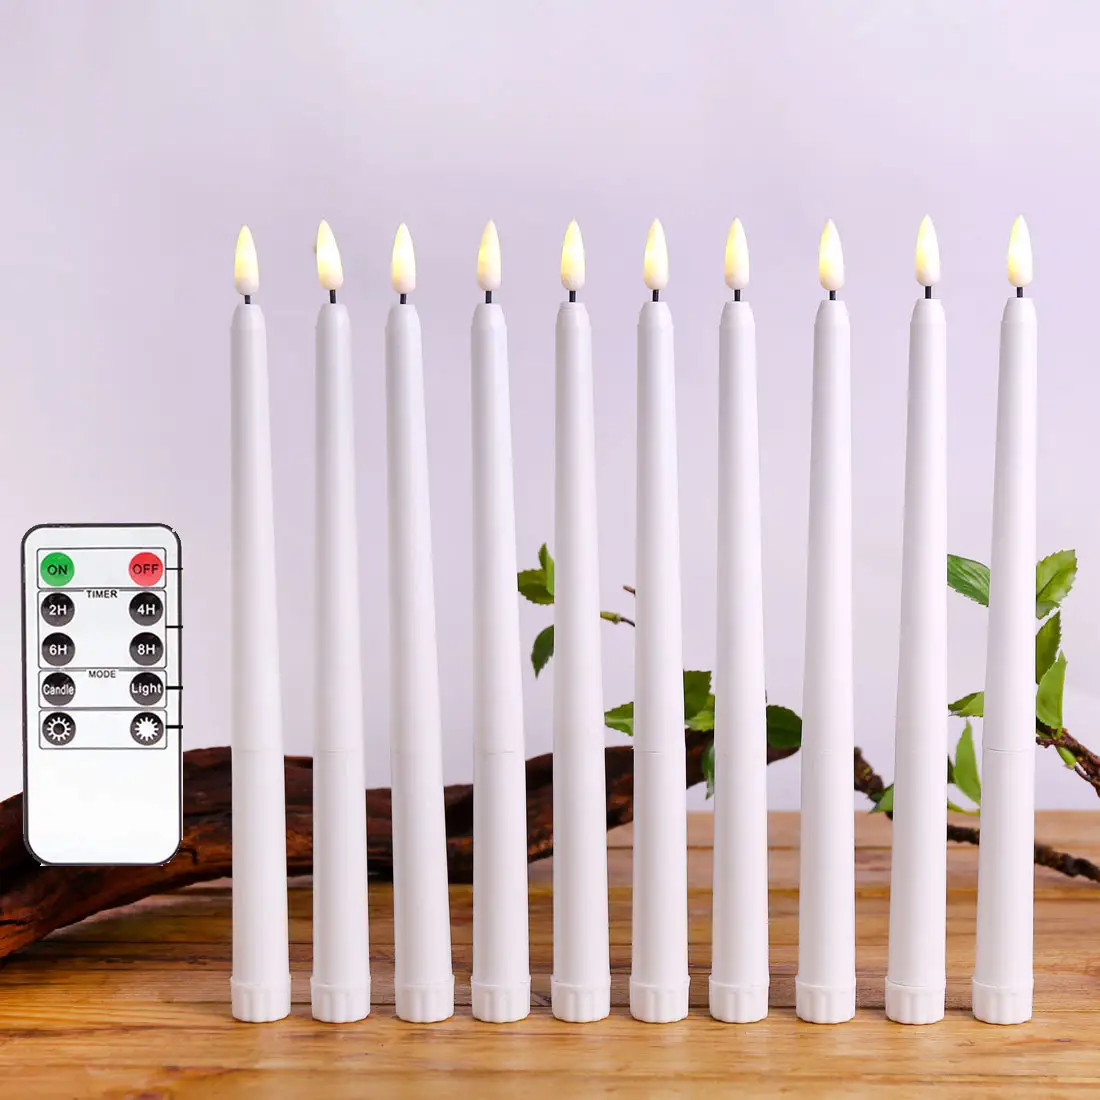 21cm Led wax candle light 3D wick led flameless soy wax shape candle moving wick led candle taper remote control soy wax